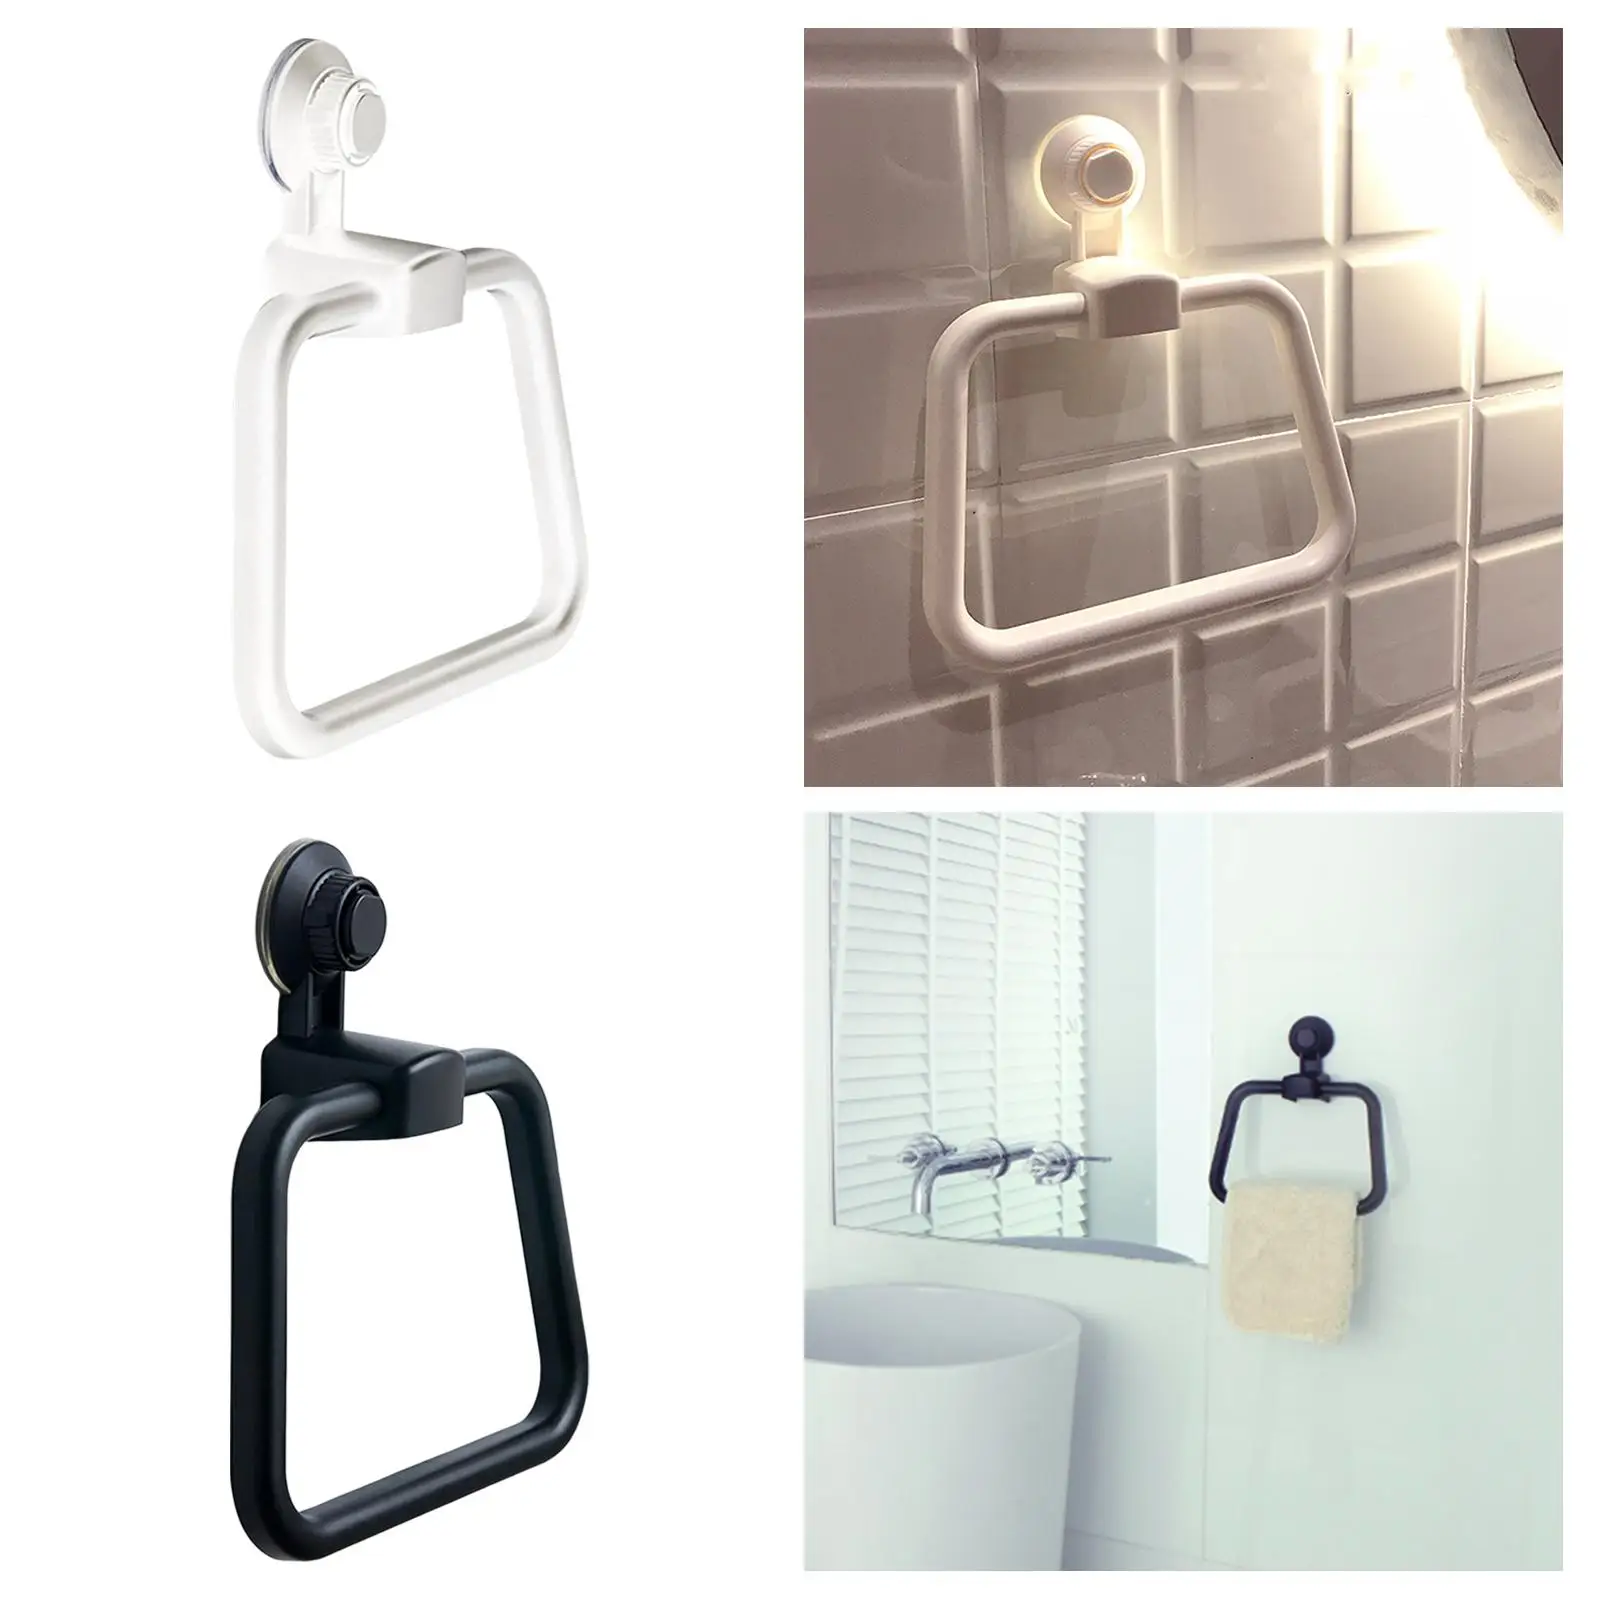 Vacuum Suction Towel Holder No Drilling Washcloth Suction Cup Towel Rings Towel Hanger for Home Wall Bathroom Laundry Room